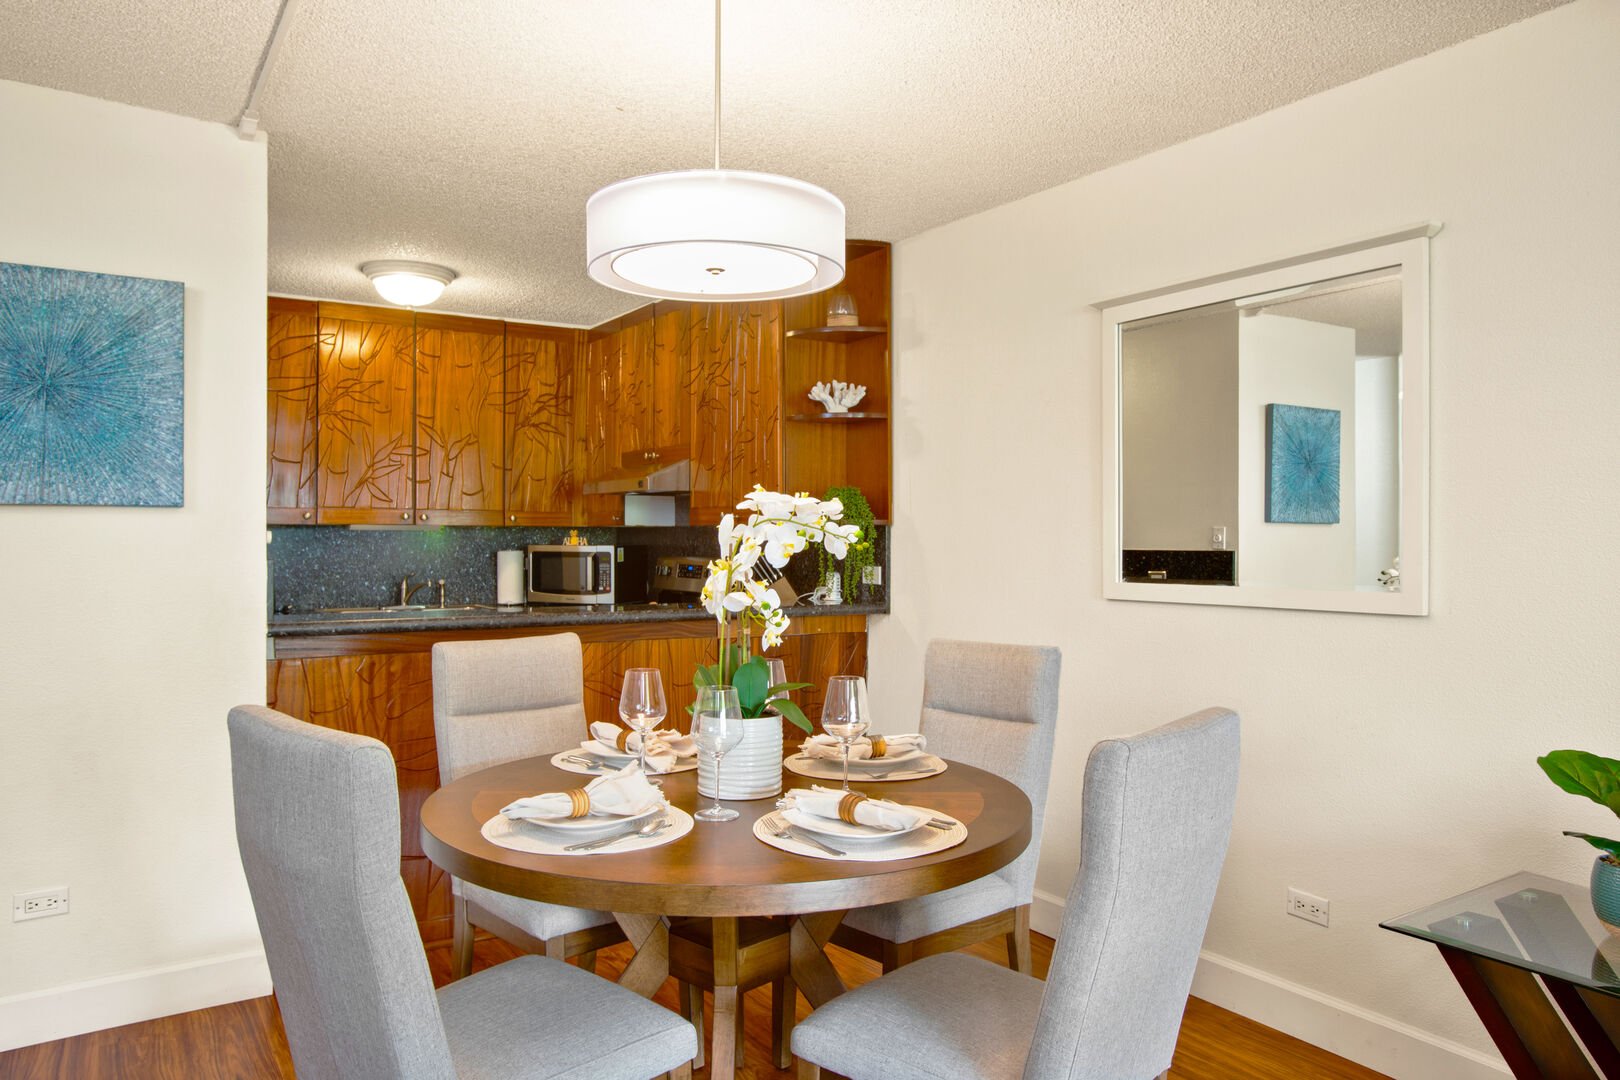 Enjoy having your meals with your friends and loved ones at this dining area good for 4!